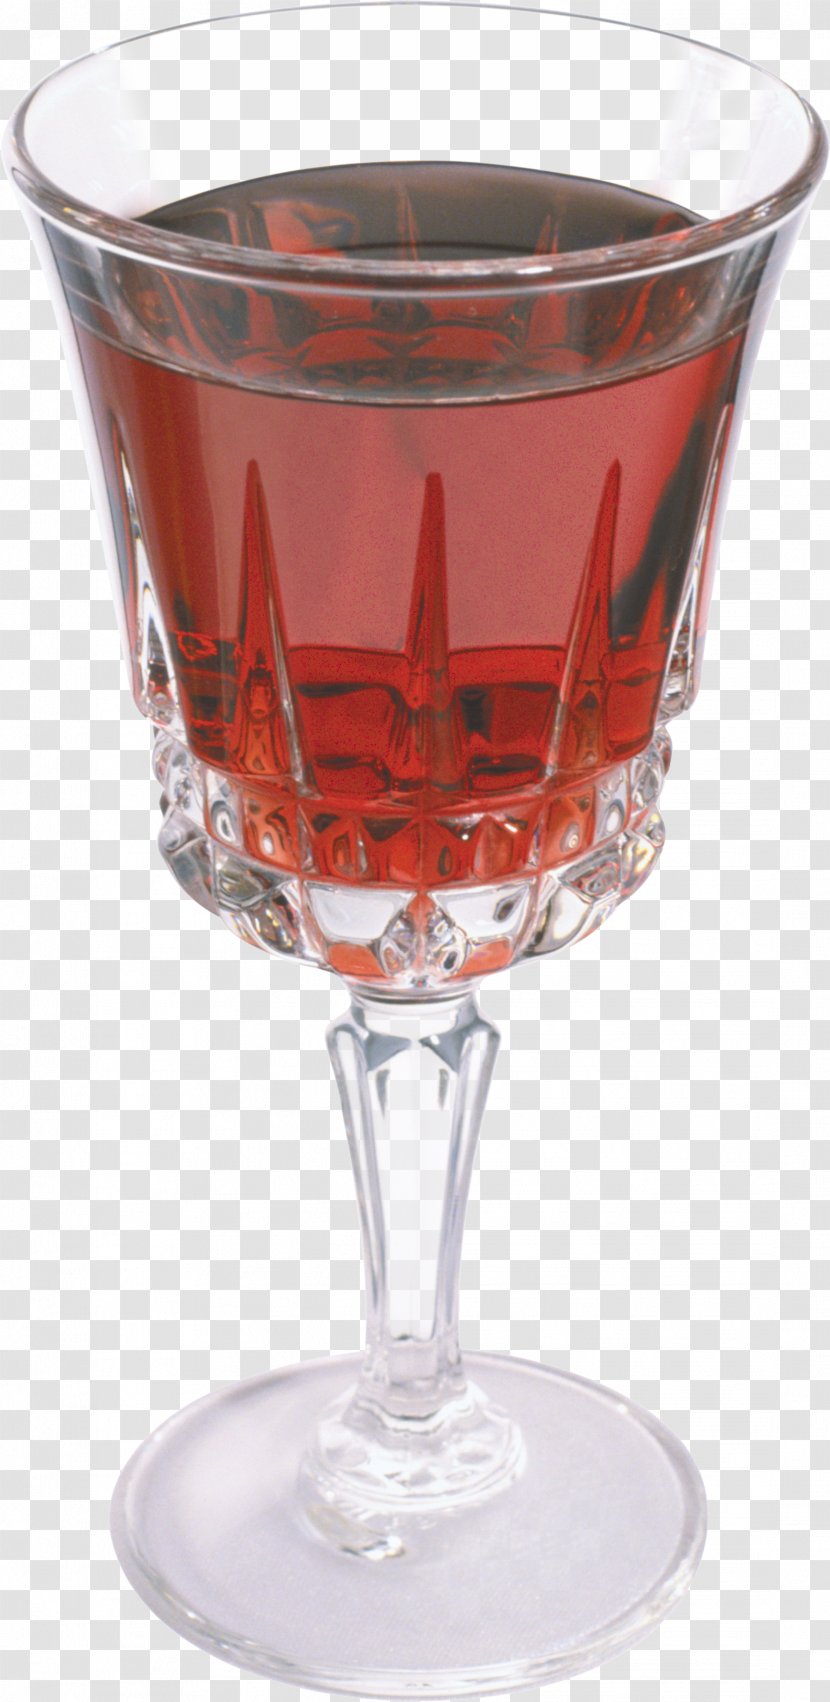 Red Wine Glass Champagne Cognac - Image Transparent PNG